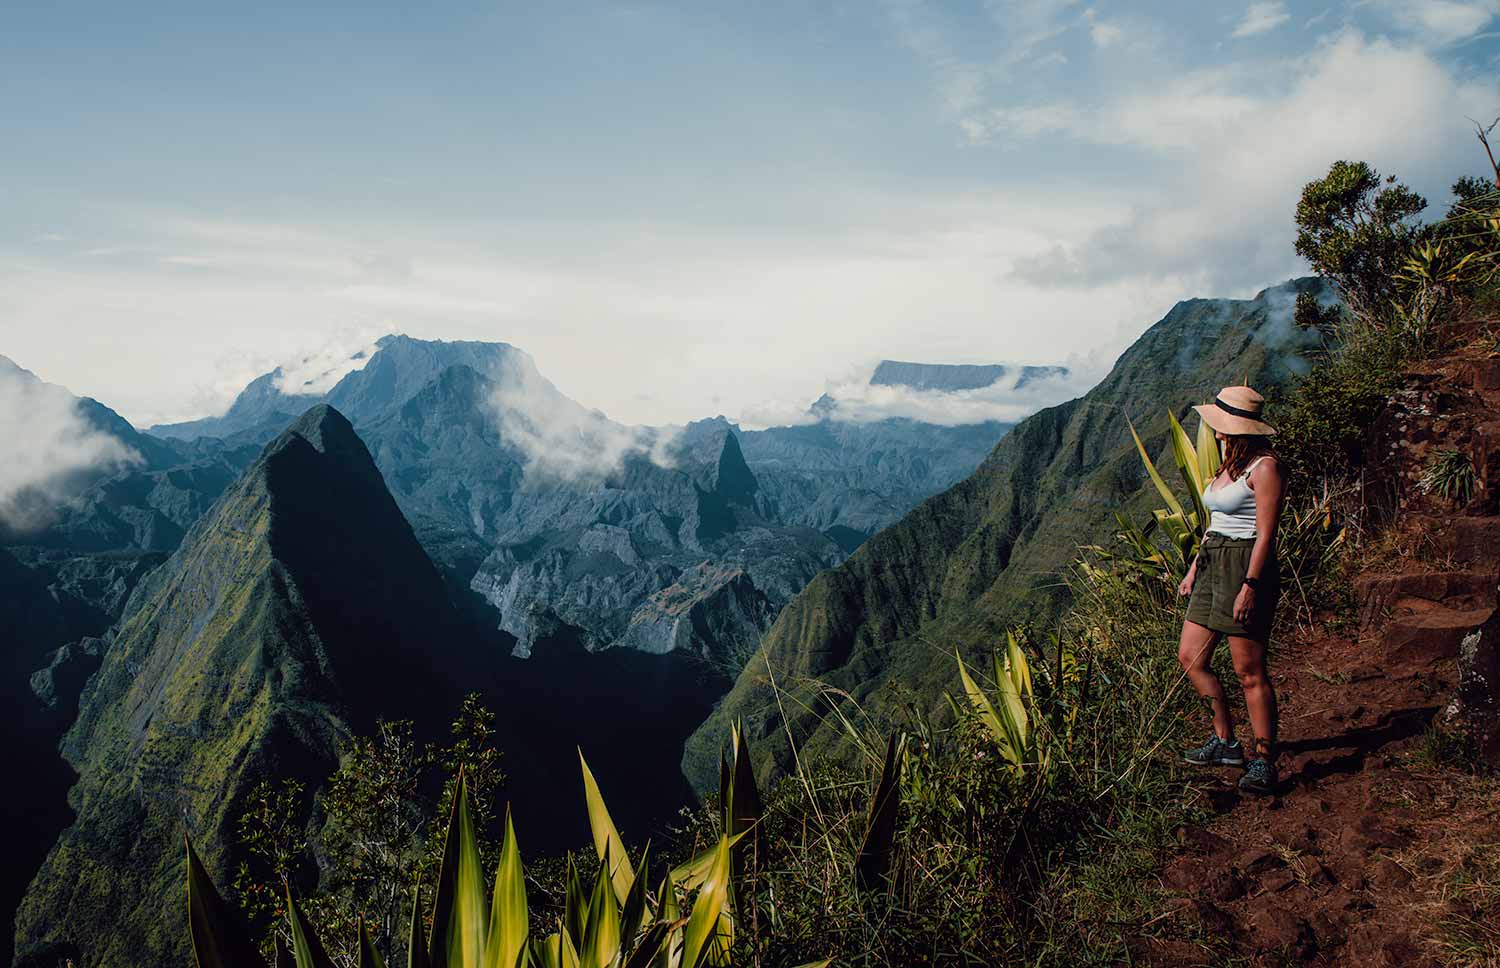 A panoramic shot from Cap Noir viewpoint, capturing the beauty of La Réunion's rugged terrain.